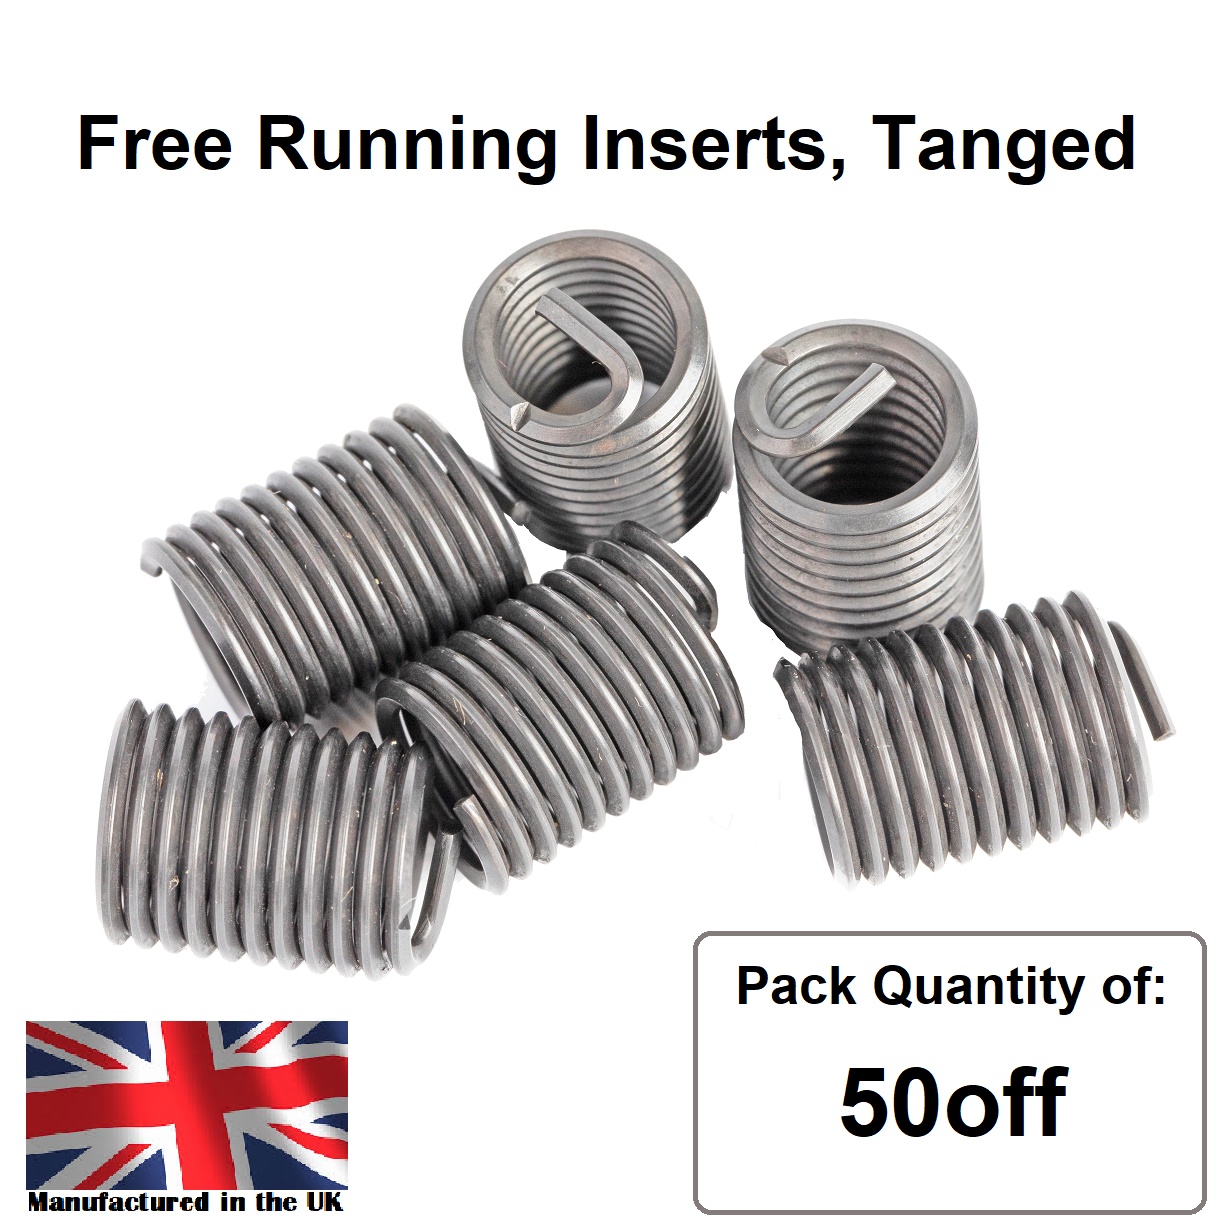 M8 x 1.0 x 1.5D Metric Fine, Free Running, Tanged, Wire Thread Repair Insert, 304/A2 Stainless (Pack 50)